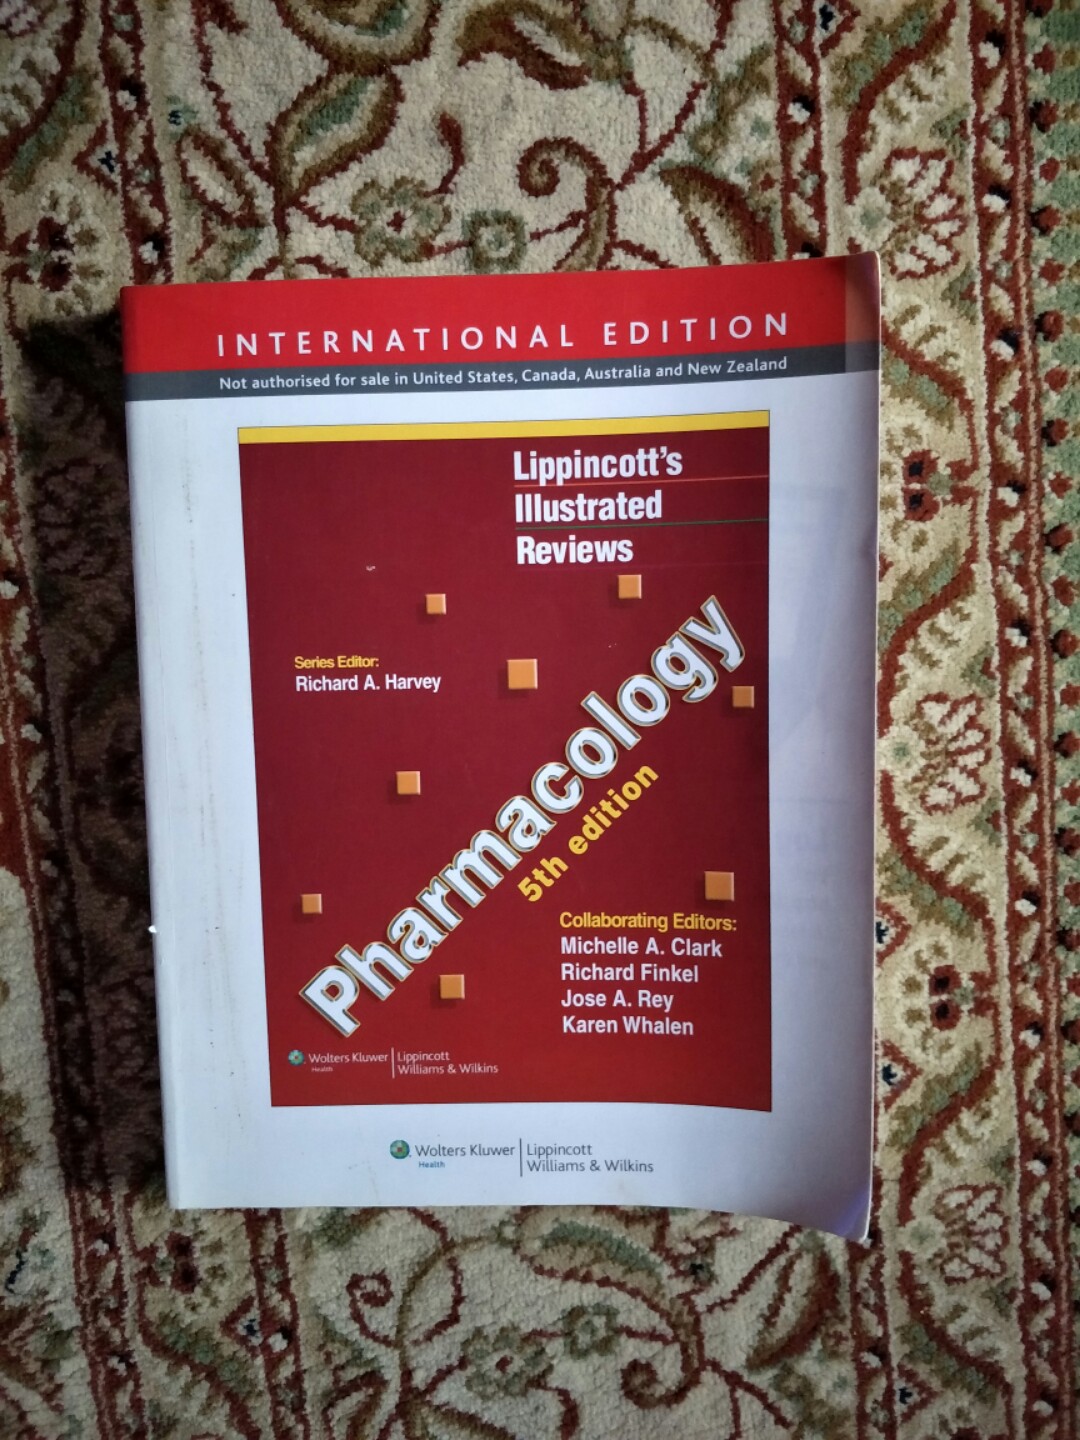 lippincott illustrated reviews pharmacology 5th edition pdf download